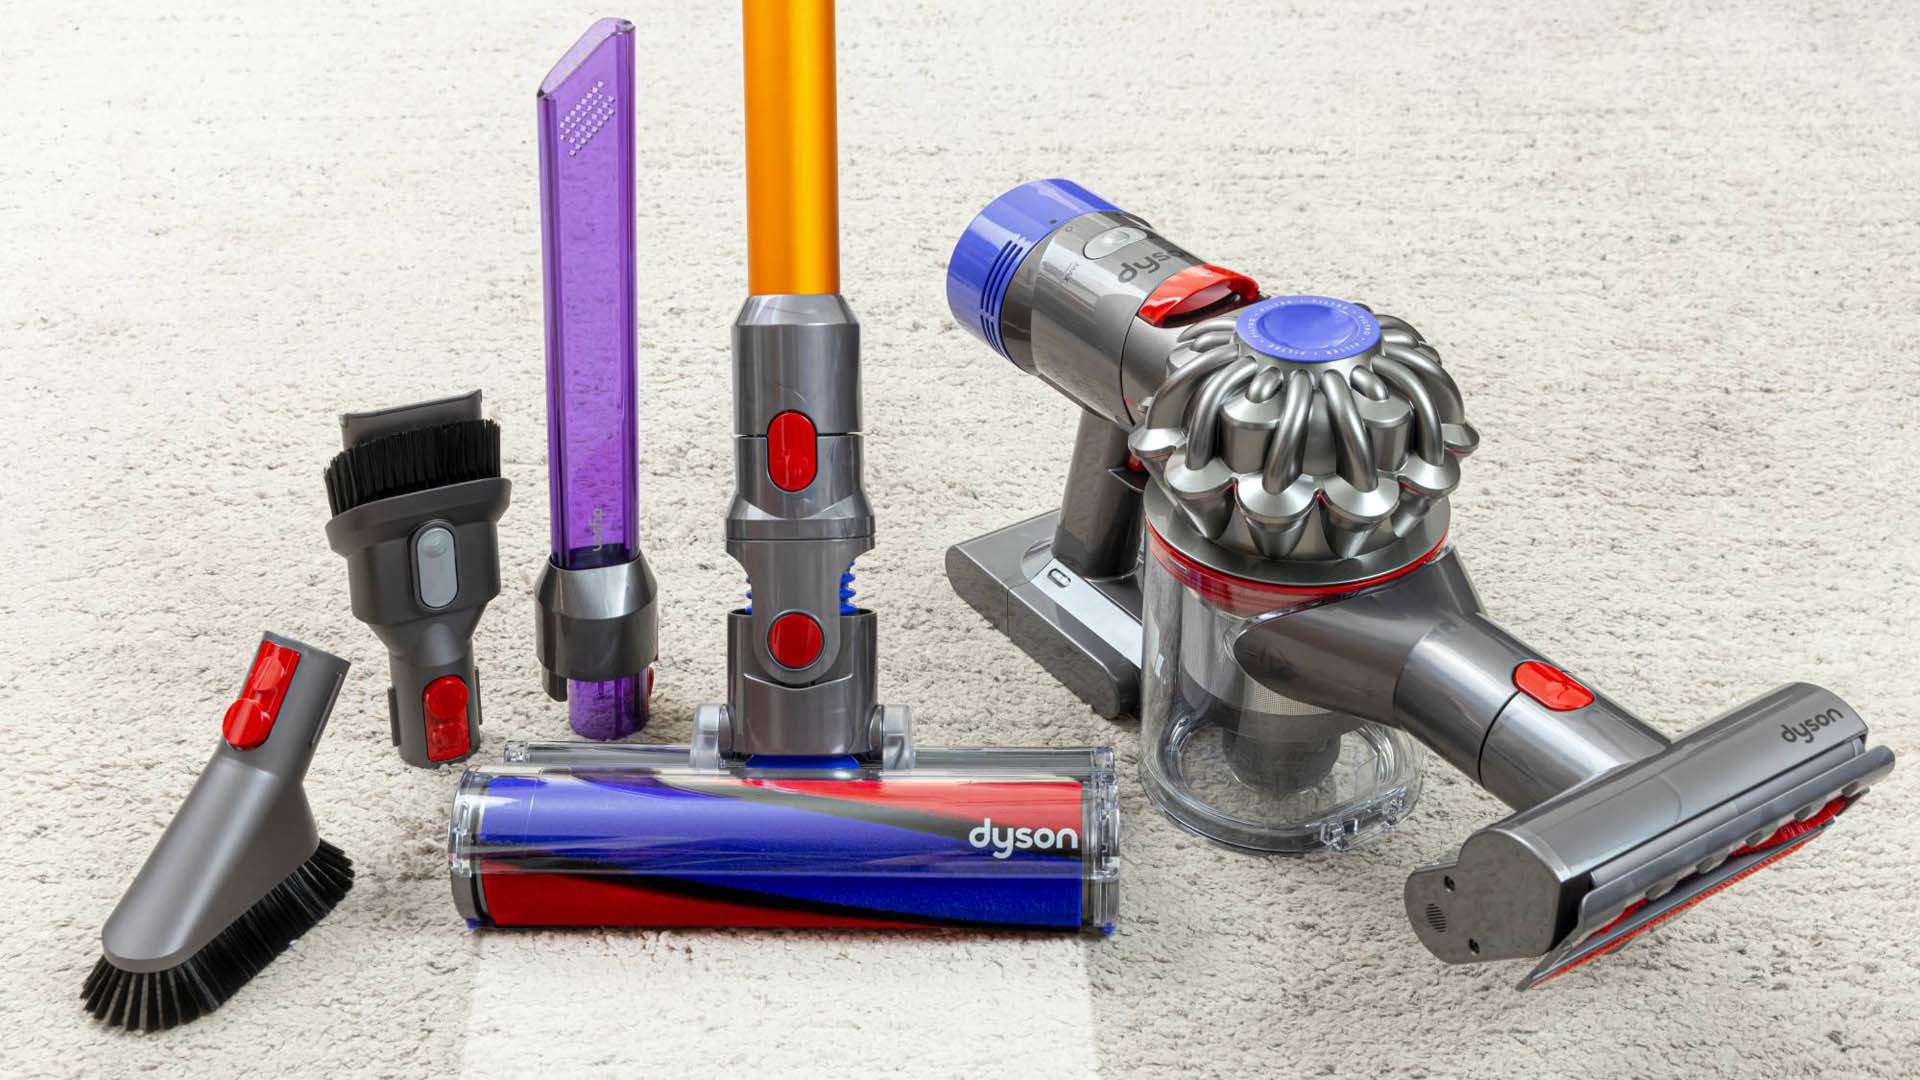 Dyson vacuum cleaners come with a wide variety of different attachments that can help make vacuuming that little bit easier